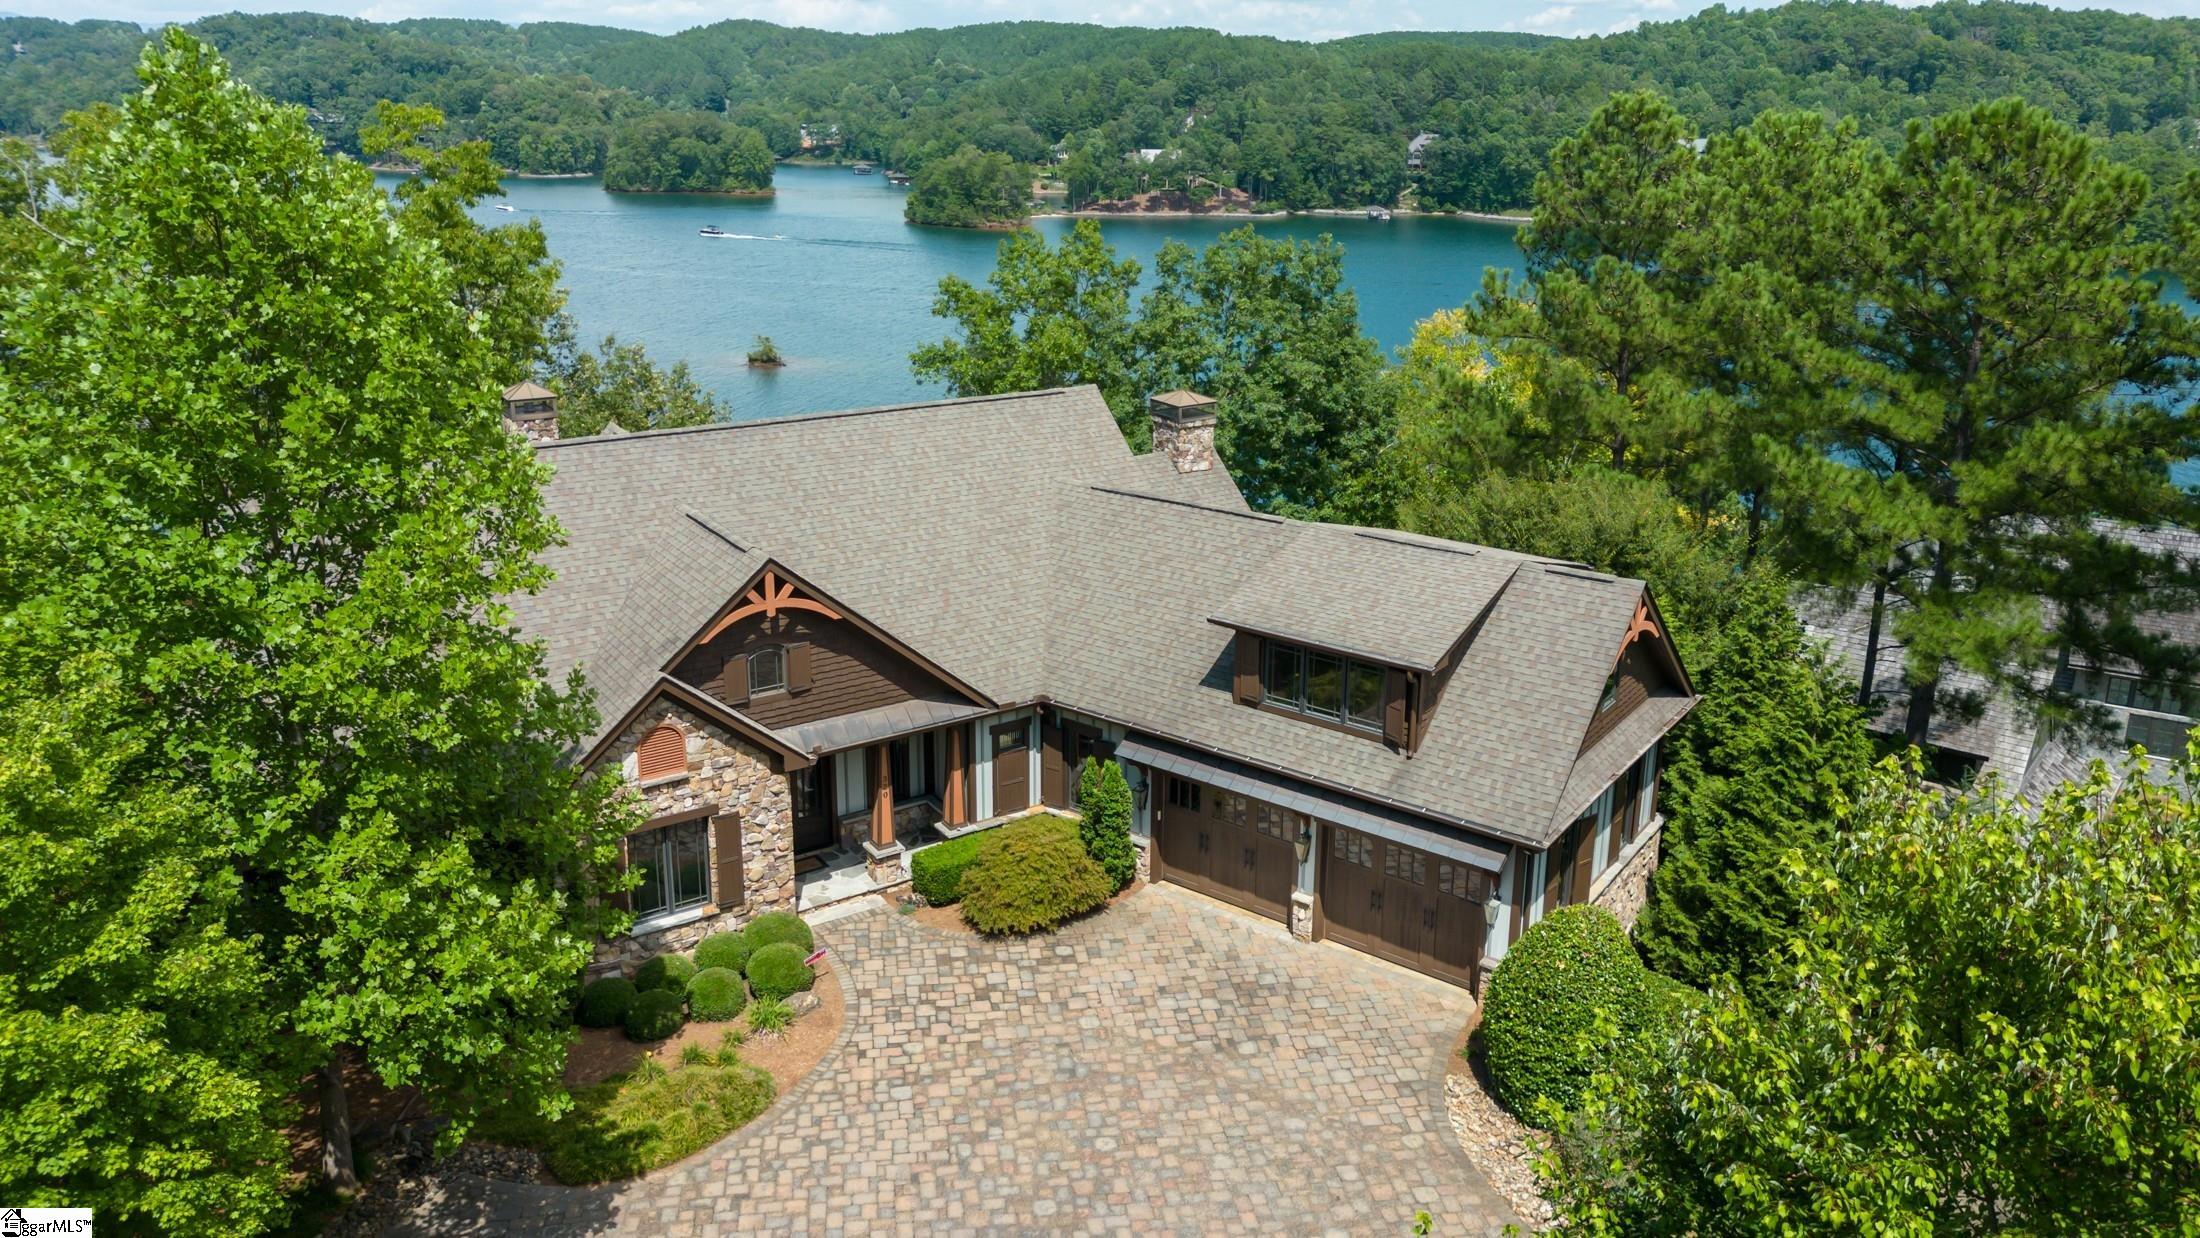 Warm and welcoming custom designed waterfront home with exceptional wide and long views of Lake Keowee and distant mountains.  This 5 bedroom, 5 baths craftsman home has the double benefit of being located close to the clubhouse and community amenities and the rear gate for easy access/egress to nearby towns for shopping and dining. Upon entering the main level, you will immediately be drawn to the wall of windows and the panoramic views overlooking Lake Keowee.  The main level features a private master suite with great lake views and a second guest suite along with an open floor plan kitchen and living area for family entertainment. The kitchen features a large island with accompanying side island for family and guest engagement, Viking appliances with gas cooktop and griddle, double ovens, twin Bosch dishwashers and two walk in pantries (one that can be converted and equipped for future elevator if needed…pad in place).  A large laundry room with significant cabinetry storage leads to steps to a large private guest suite over the garage.  Off the kitchen you will find a screened porch with fireplace perfect for quiet time, reading or just enjoying a warm fire and the views.  Downstairs you will find the recreation room, a wet bar area equipped with ice machine, refrigerator and display cabinetry, an additional private bedroom suite, and a 5th bedroom (great lake view) with shared hallway bath, a second laundry room, a large bonus room that can be used for an office, exercise room, or bunk room and multiple storage areas including a golf cart/lake toys garage with double door exterior access.  Take the golf cart to the waterfront via the beautifully landscaped boulder walls and stone paver path and enjoy expansive views from the fully equipped dock with water, electricity, lift and jet ski ports.  Enjoy a relaxing happy hour with great views of the lake and mountains from the firepit or hot tub on the lower-level patio. The tasteful landscaping and flat access from the road to the large motor court with ample parking makes a pleasing first impression. The home is equipped with many features including a 17kw generator, lightning suppression system, supplemental steam shower system, and radon mitigation system.   The exterior of the home was recently painted, new mulch installed, and the hot tub serviced.  A whole house prelisting inspection was completed, and items addressed including radon mitigation installation.